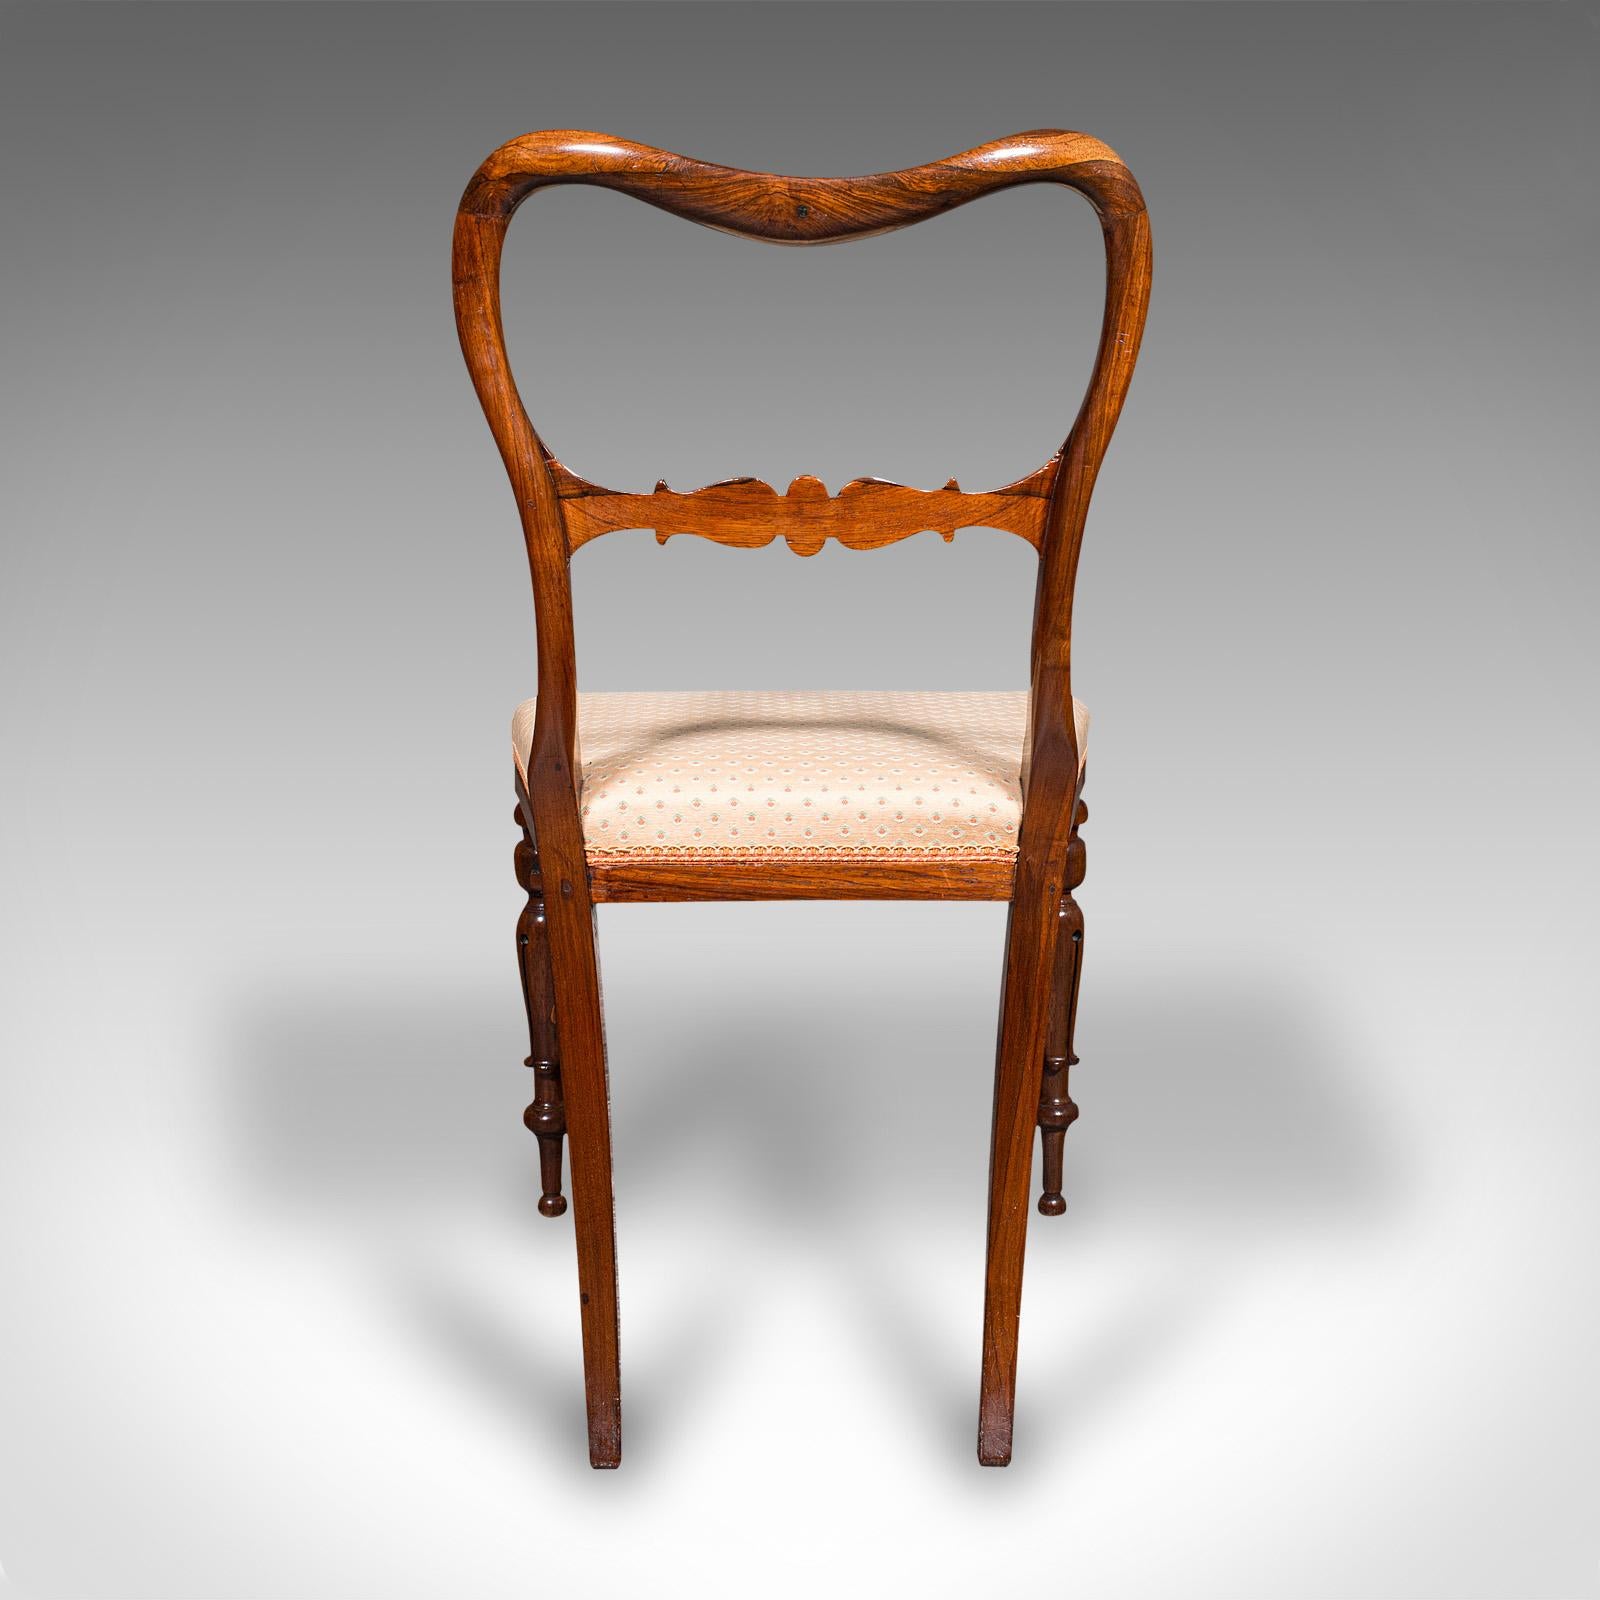 19th Century Antique Buckle Back Chair, English, Drawing Room, Side Seat, Victorian, C.1840